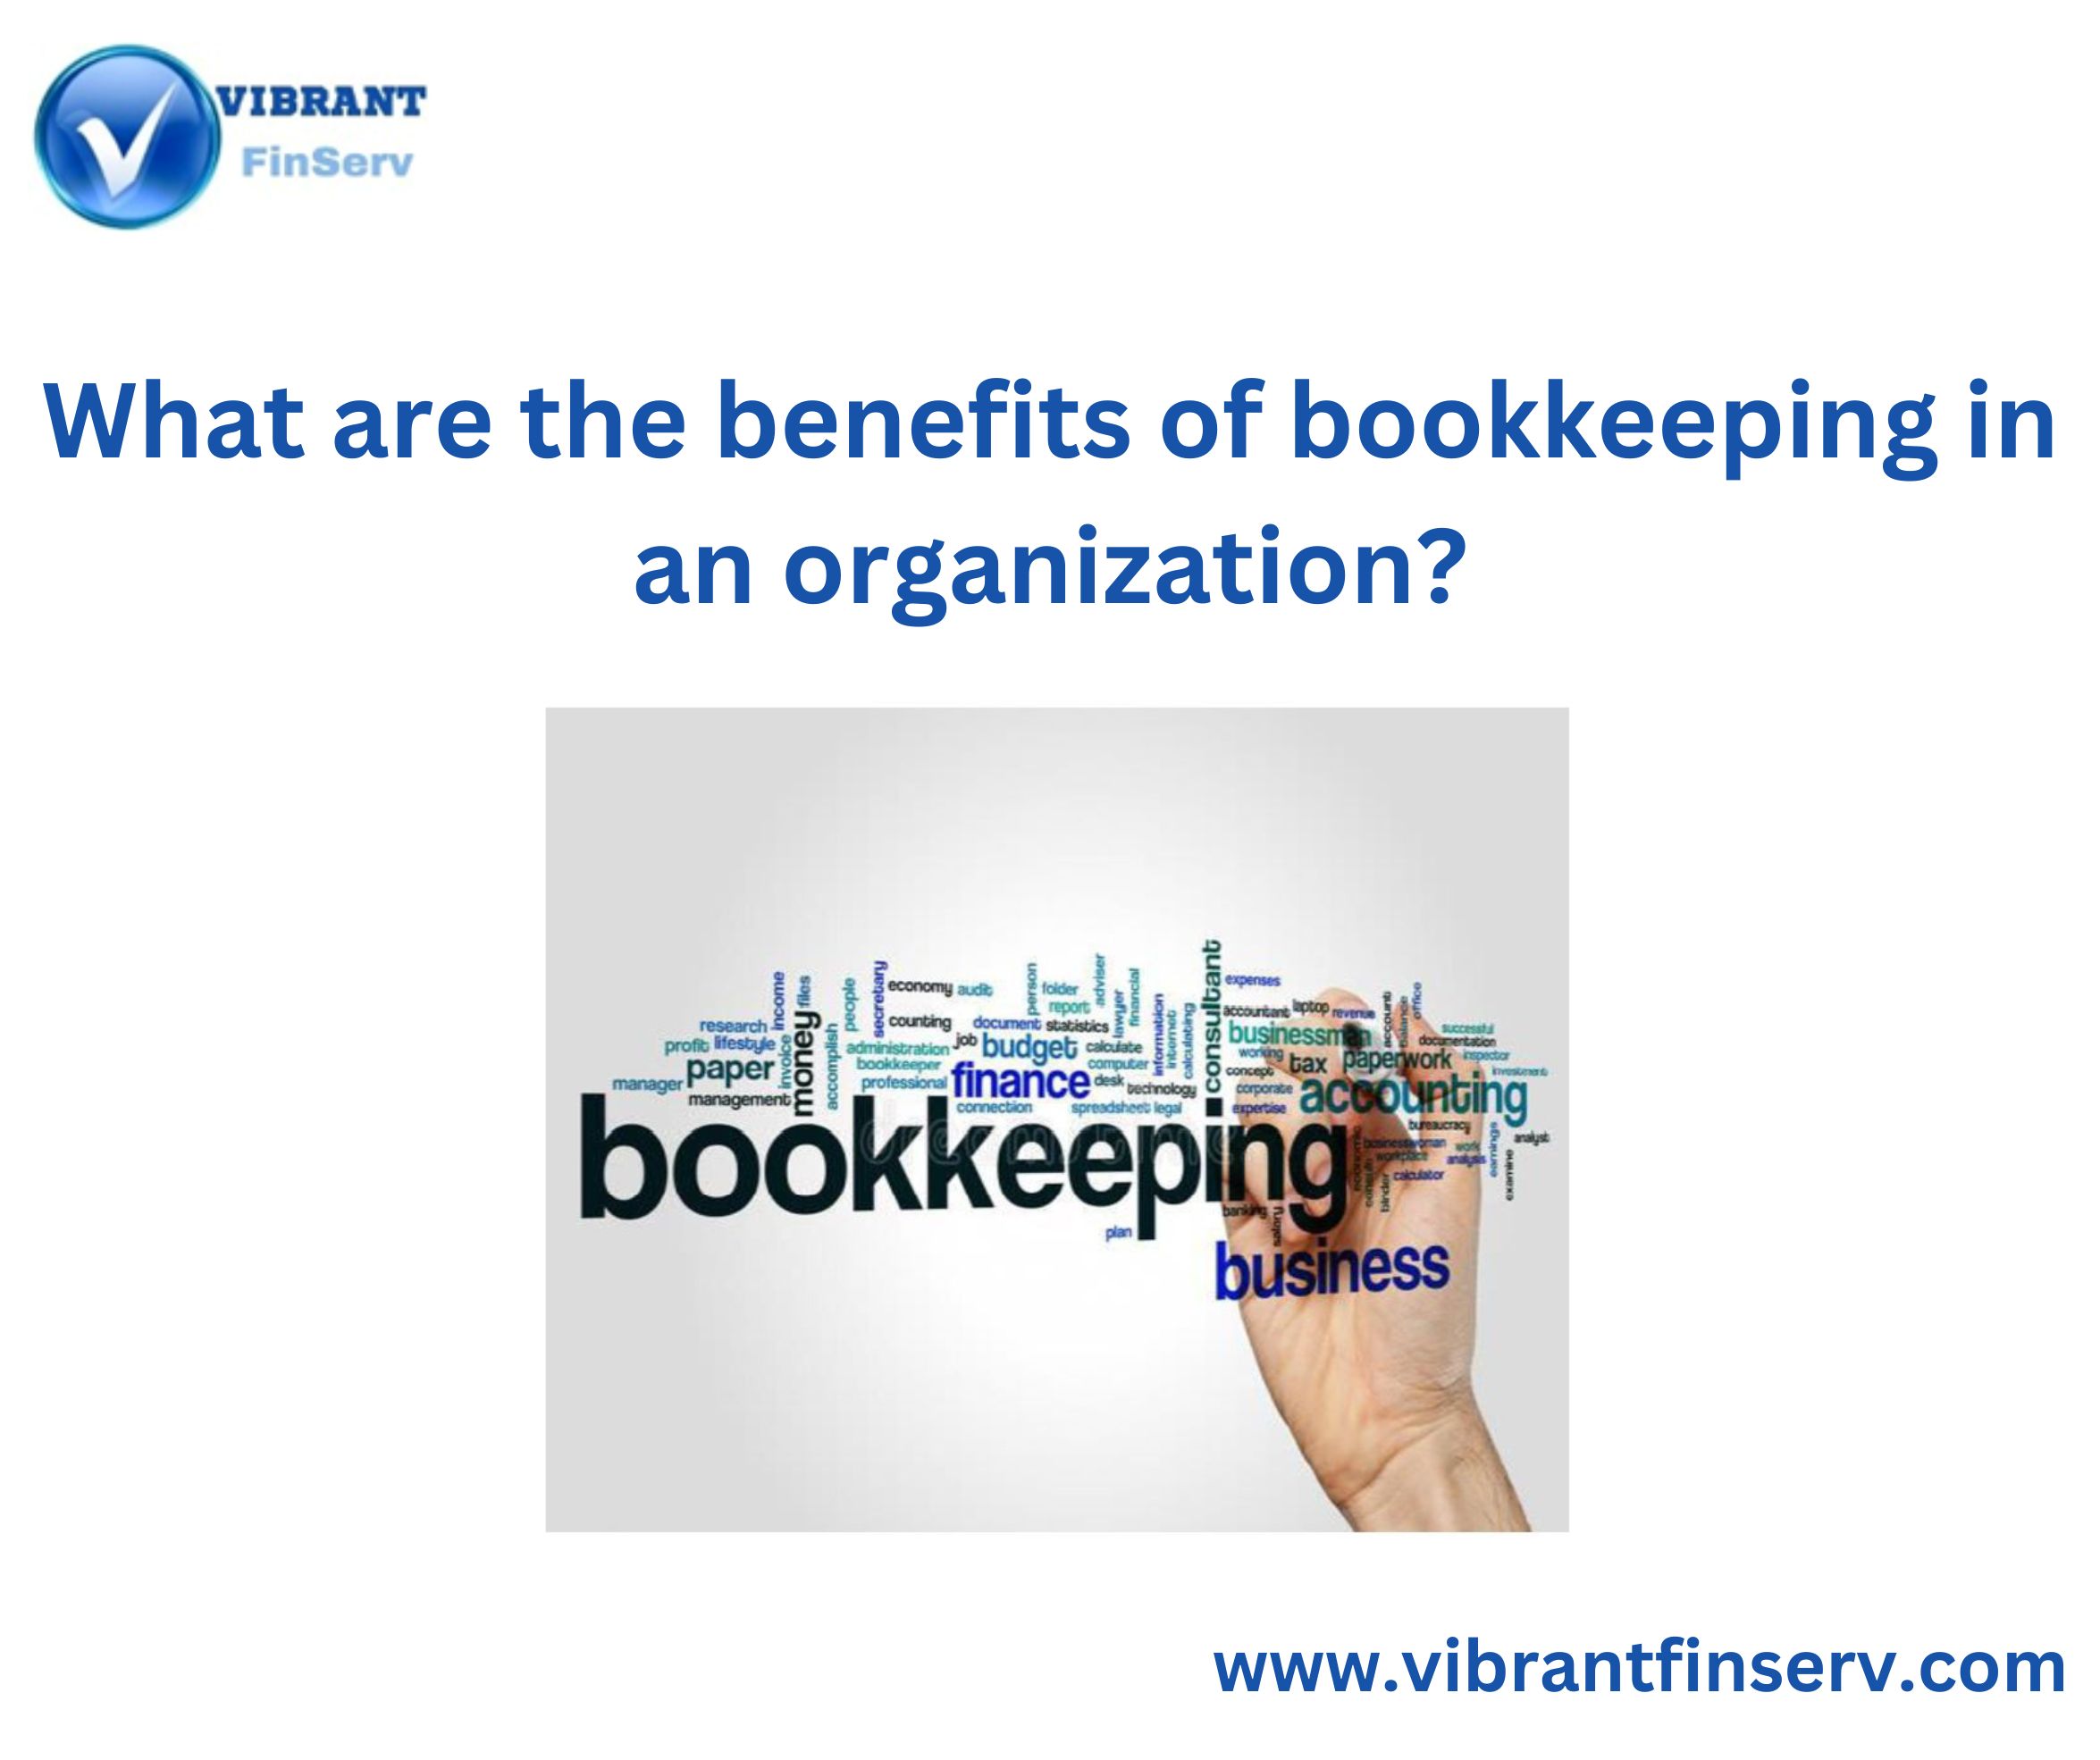 Benefits of bookkeeping